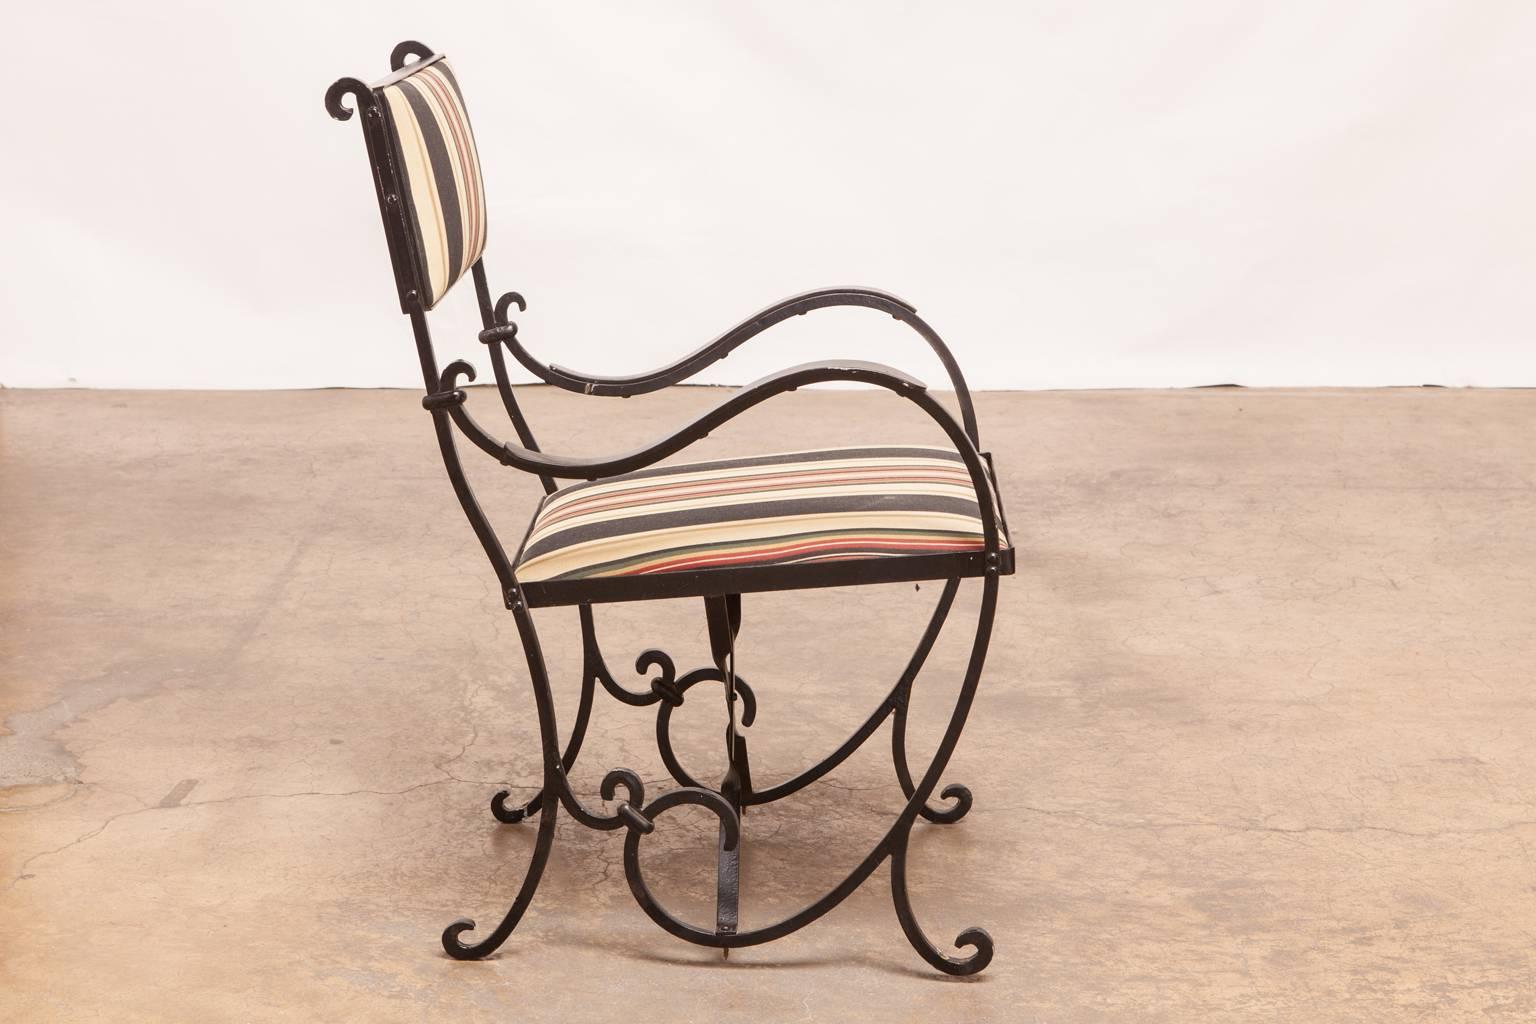 Fantastic pair of French wrought iron armchairs featuring long, graceful curved iron frames ending in decorative scrolls. These whimsical chairs appear to have been mounted to a deck or floor since each leg has a small mounting hole in the bottom.